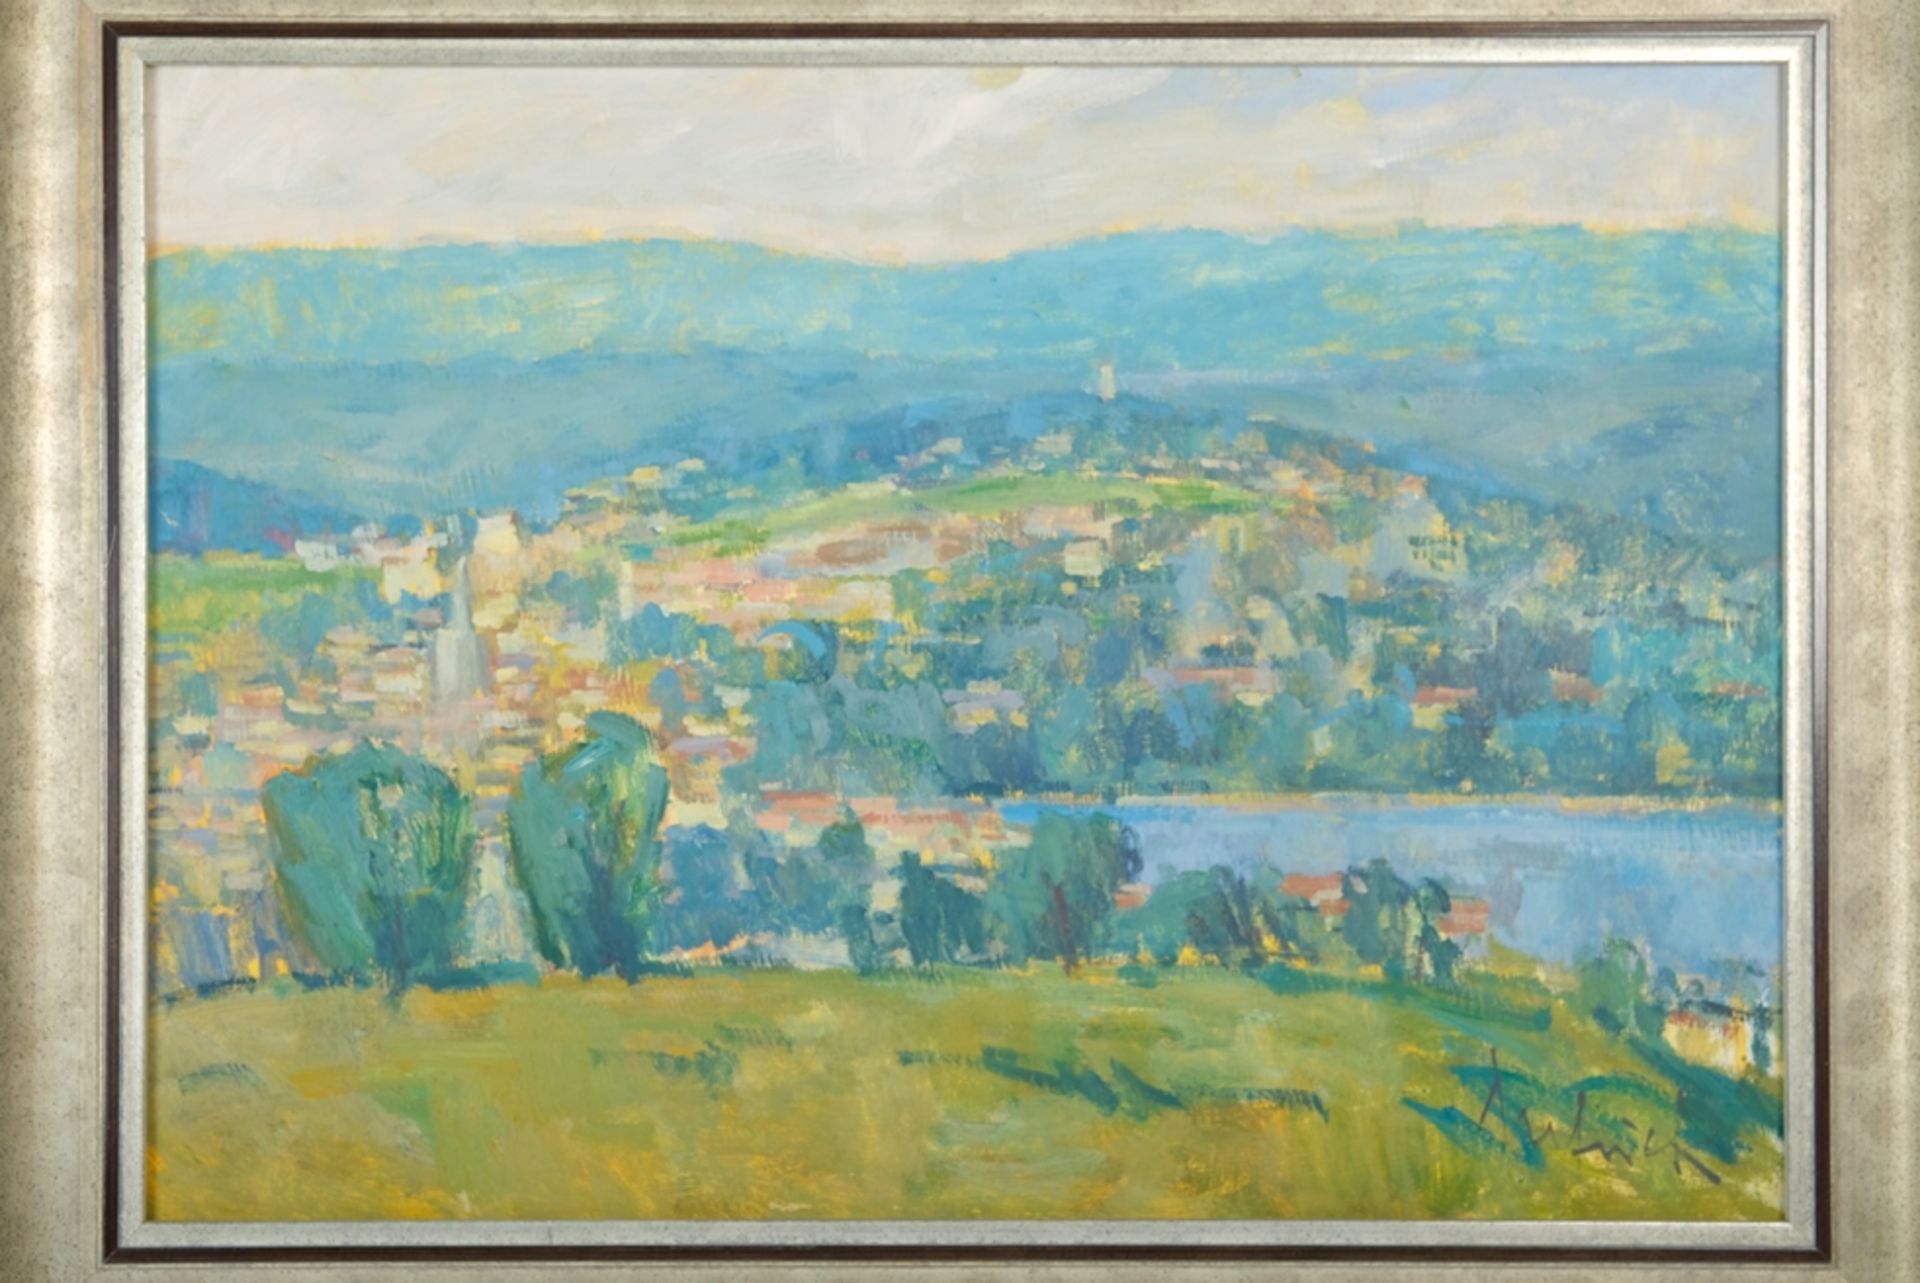 Frick, Guido (born 1947) "Blick über Konstanz", View over Constance and the lake, in the background